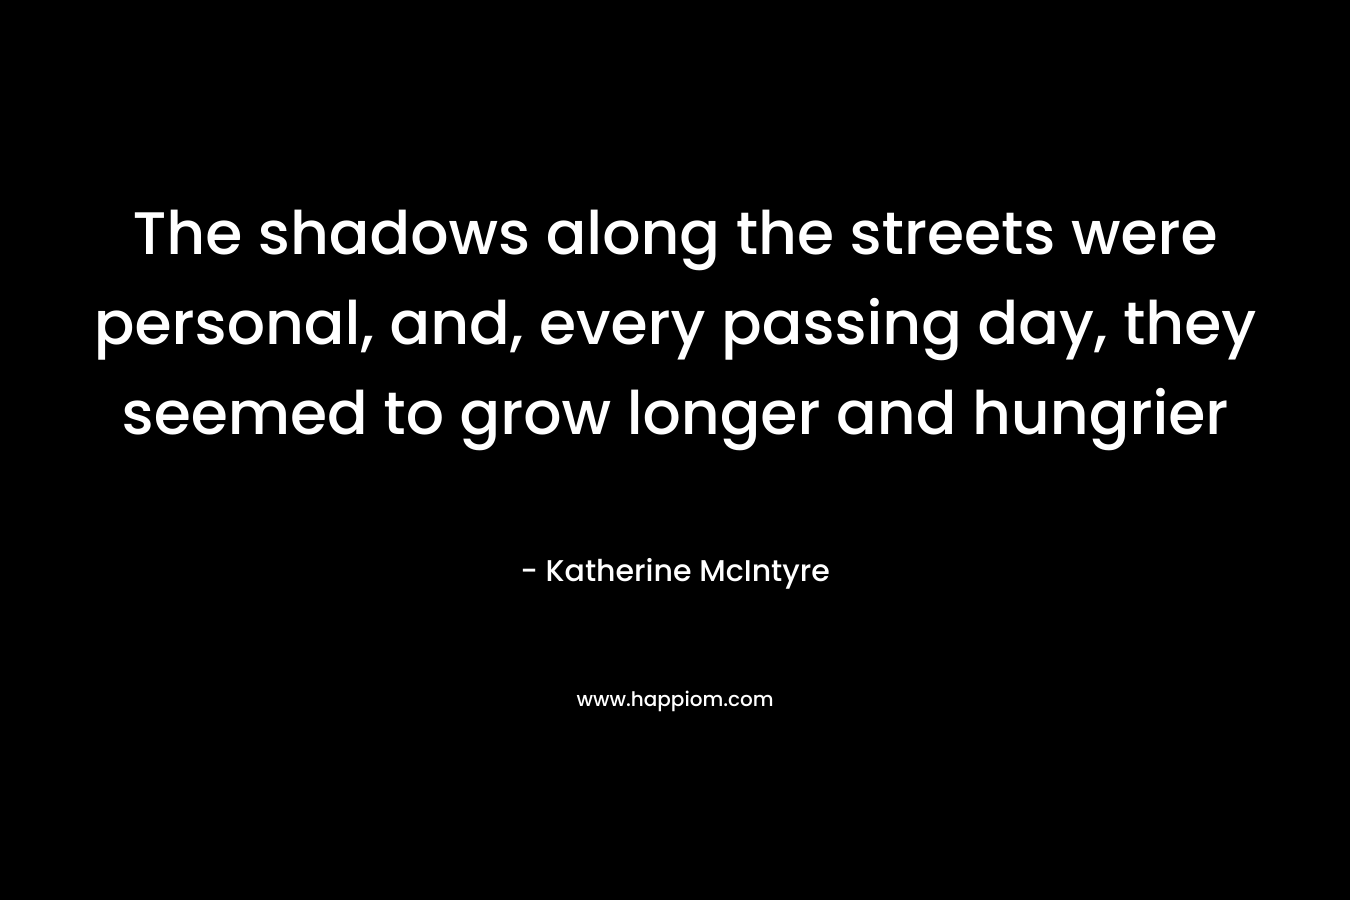 The shadows along the streets were personal, and, every passing day, they seemed to grow longer and hungrier – Katherine McIntyre